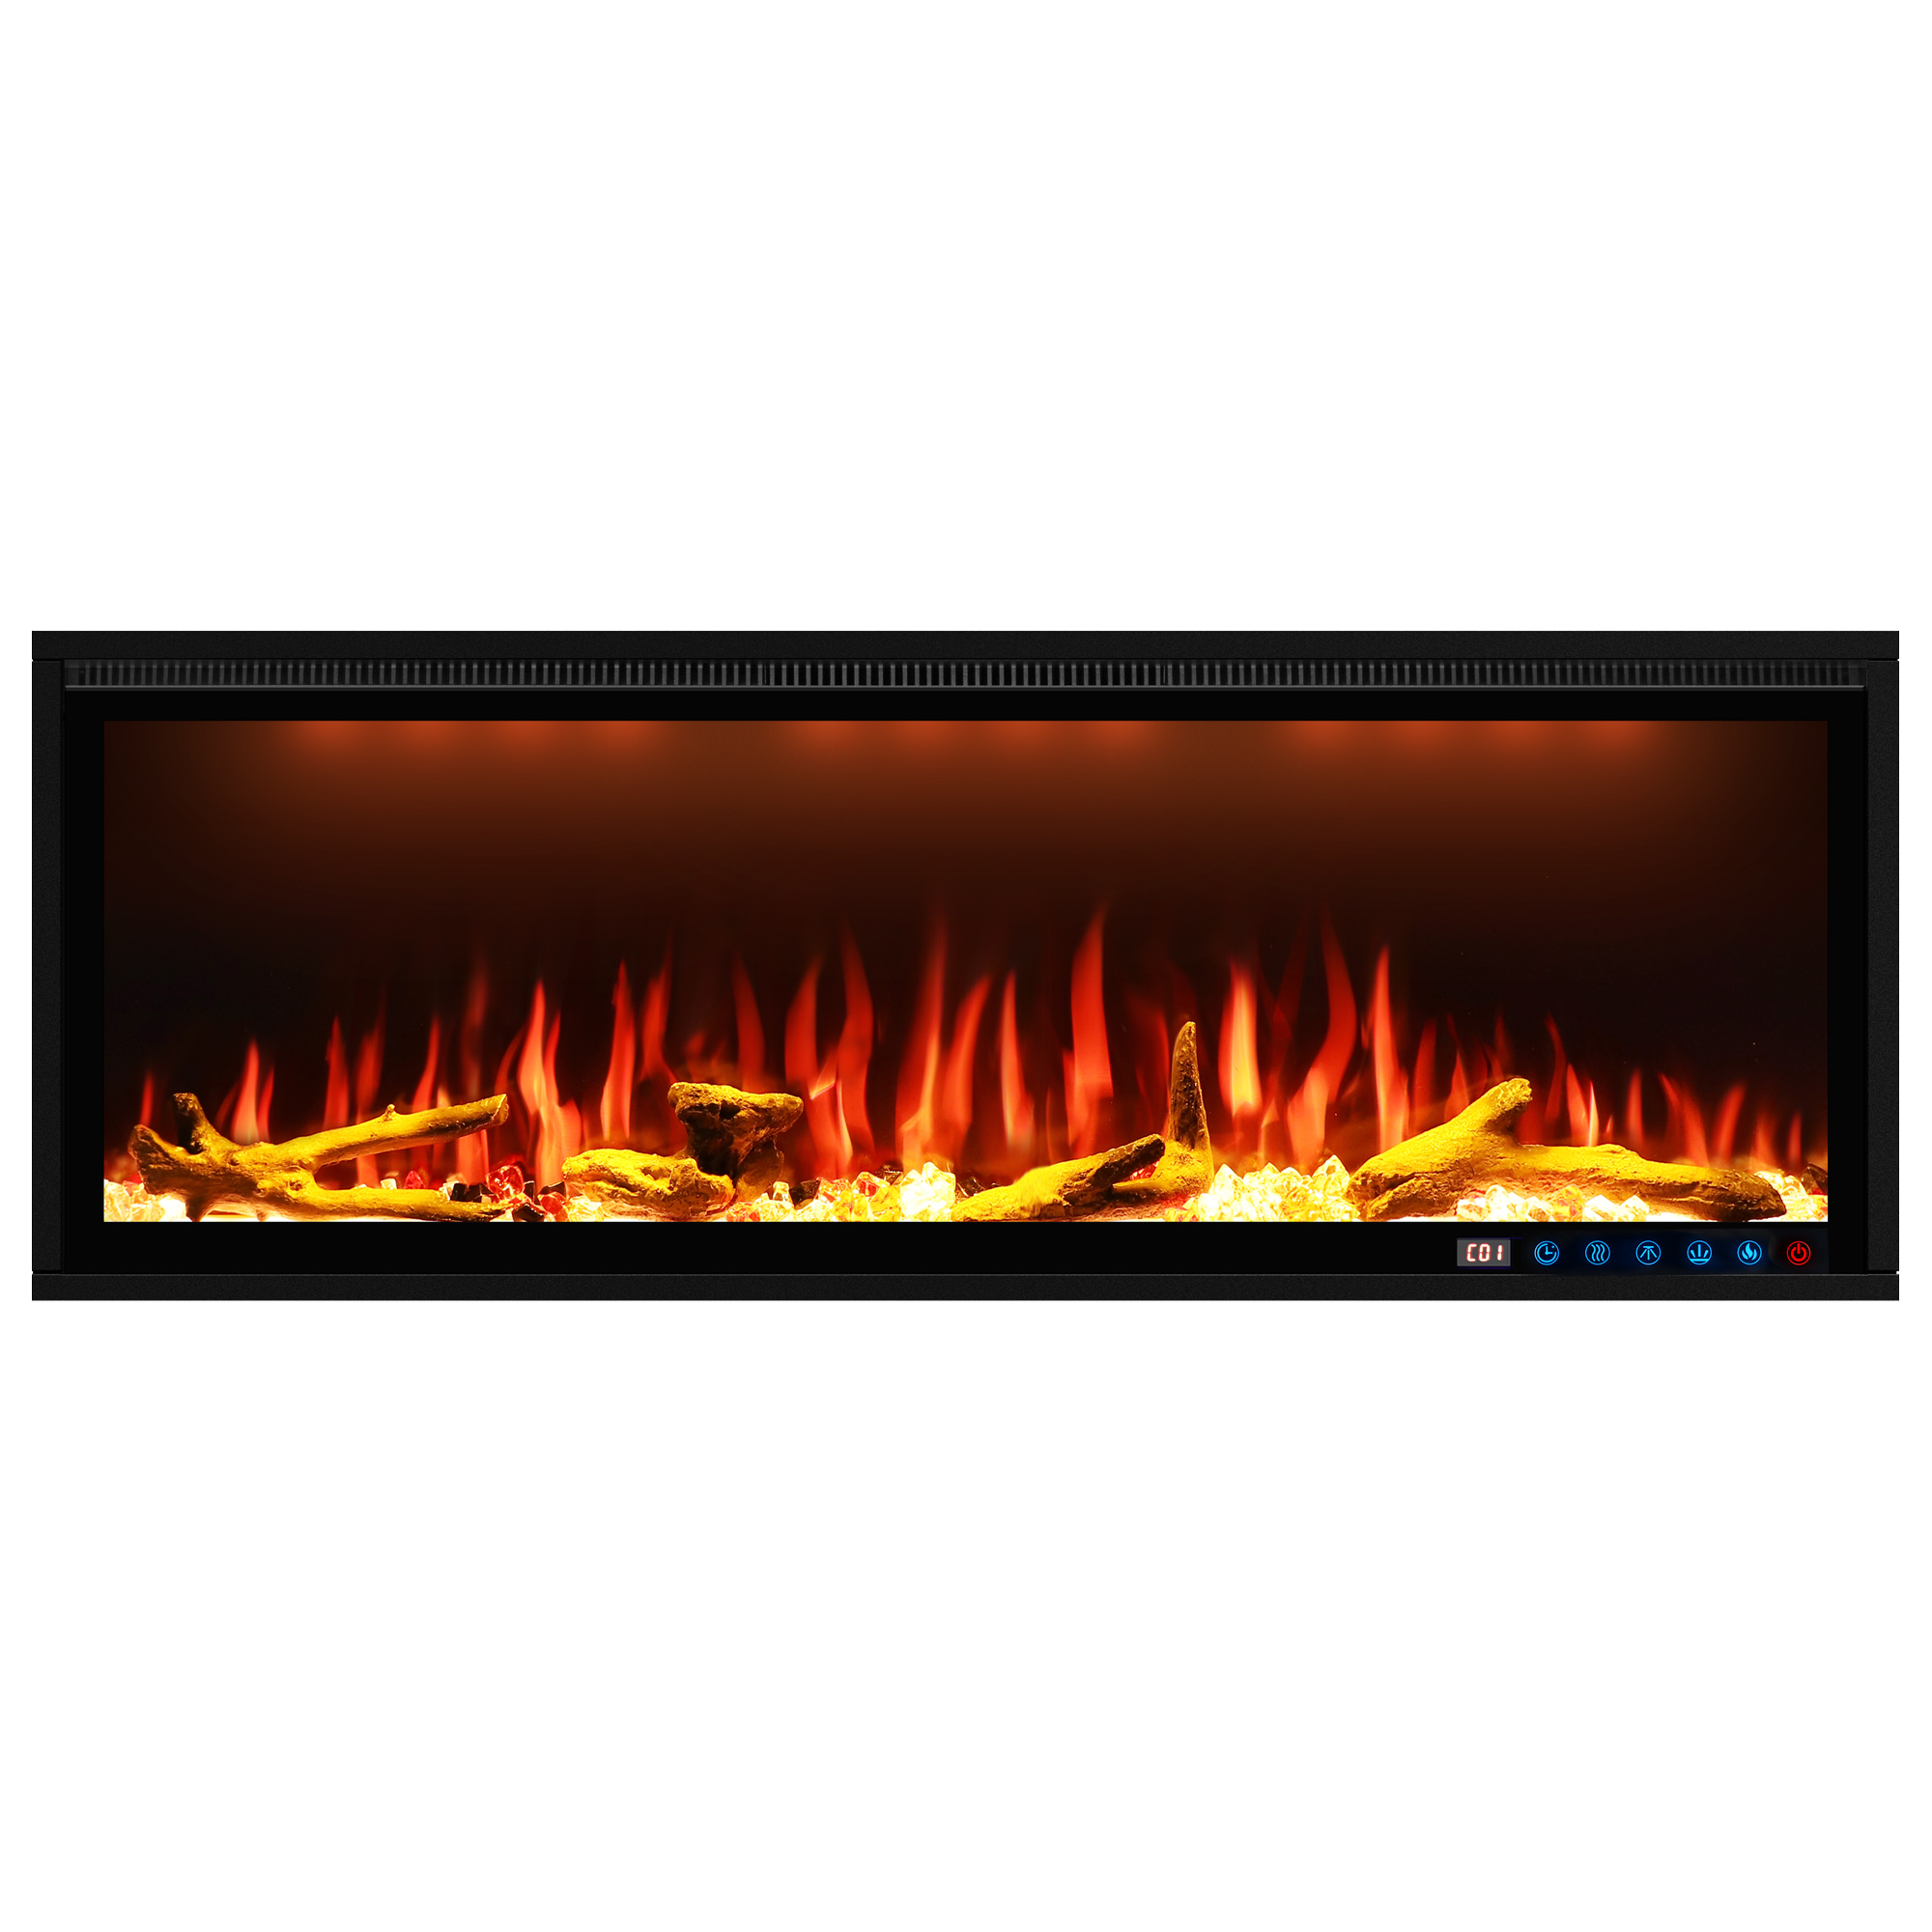 Smart Electric Fireplace, Recessed & Wall Mounted Fireplace, 13*13*3 Color Combinations, App Control Fireplace Heater, Timer